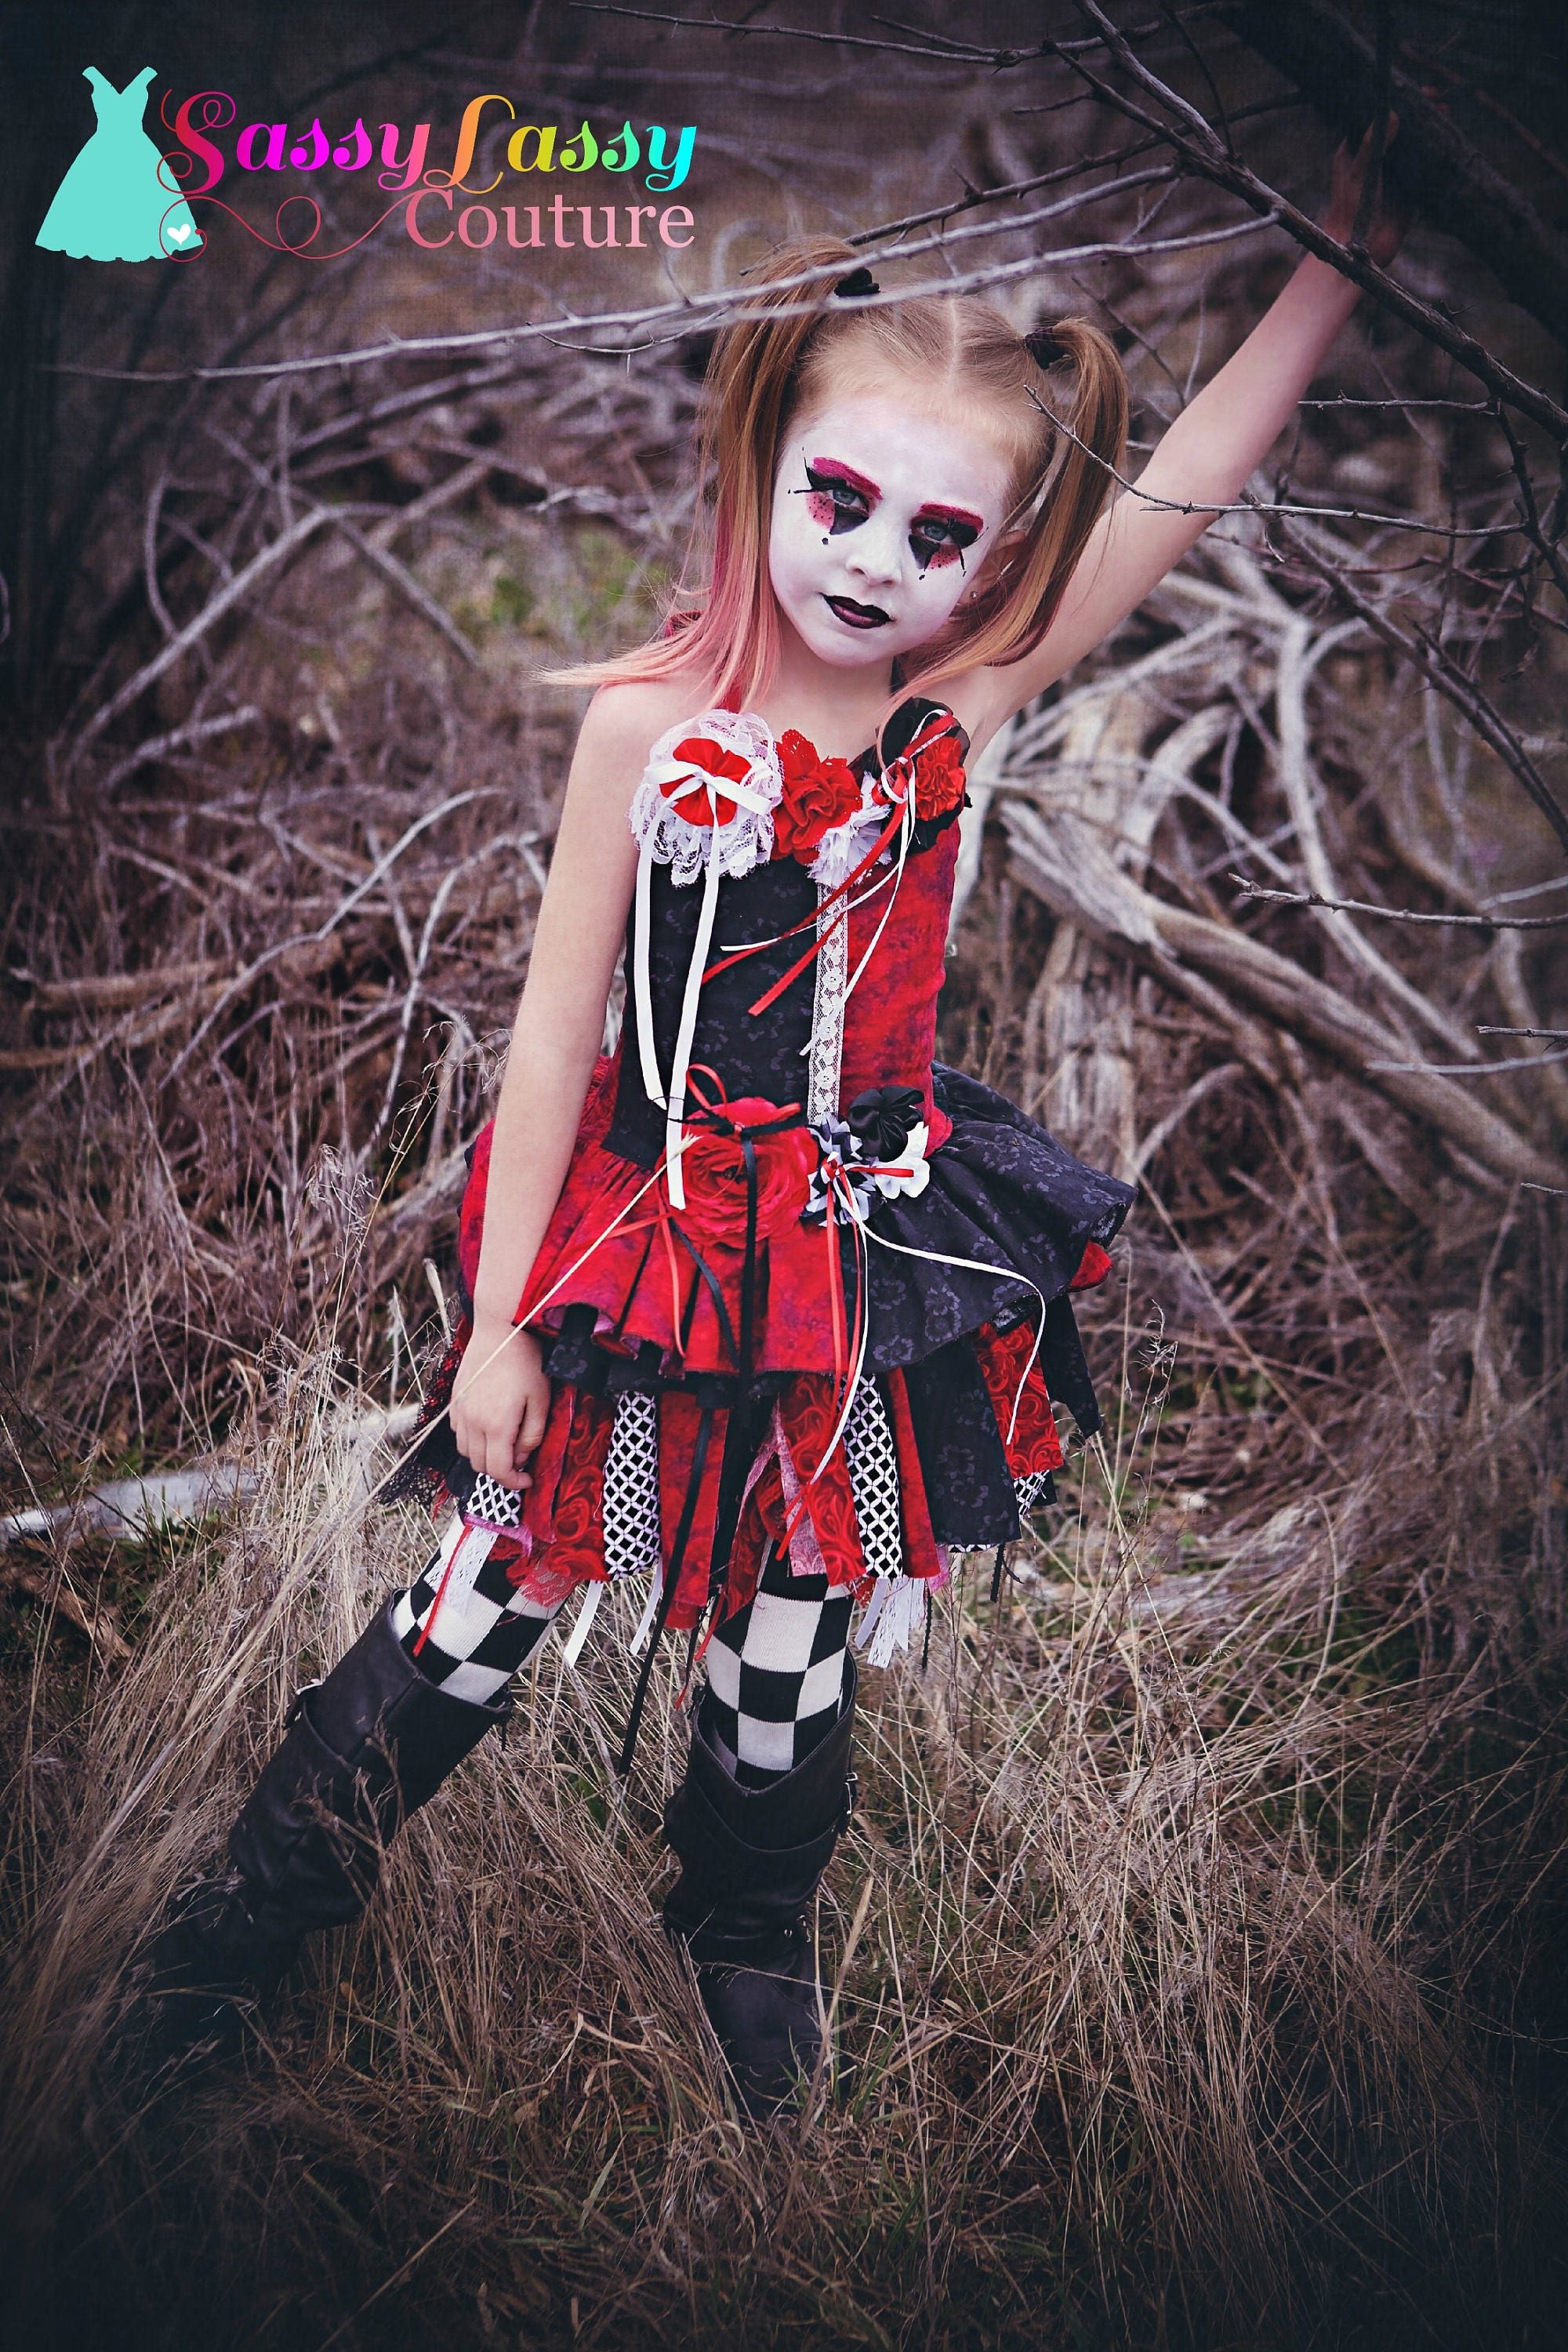 Harley Quinn Harlequin Goth Fairy Costume Queen of Hearts Costume Custom  made to order. Costume for Halloween. Party Costume. Harley Quinn -   Italia